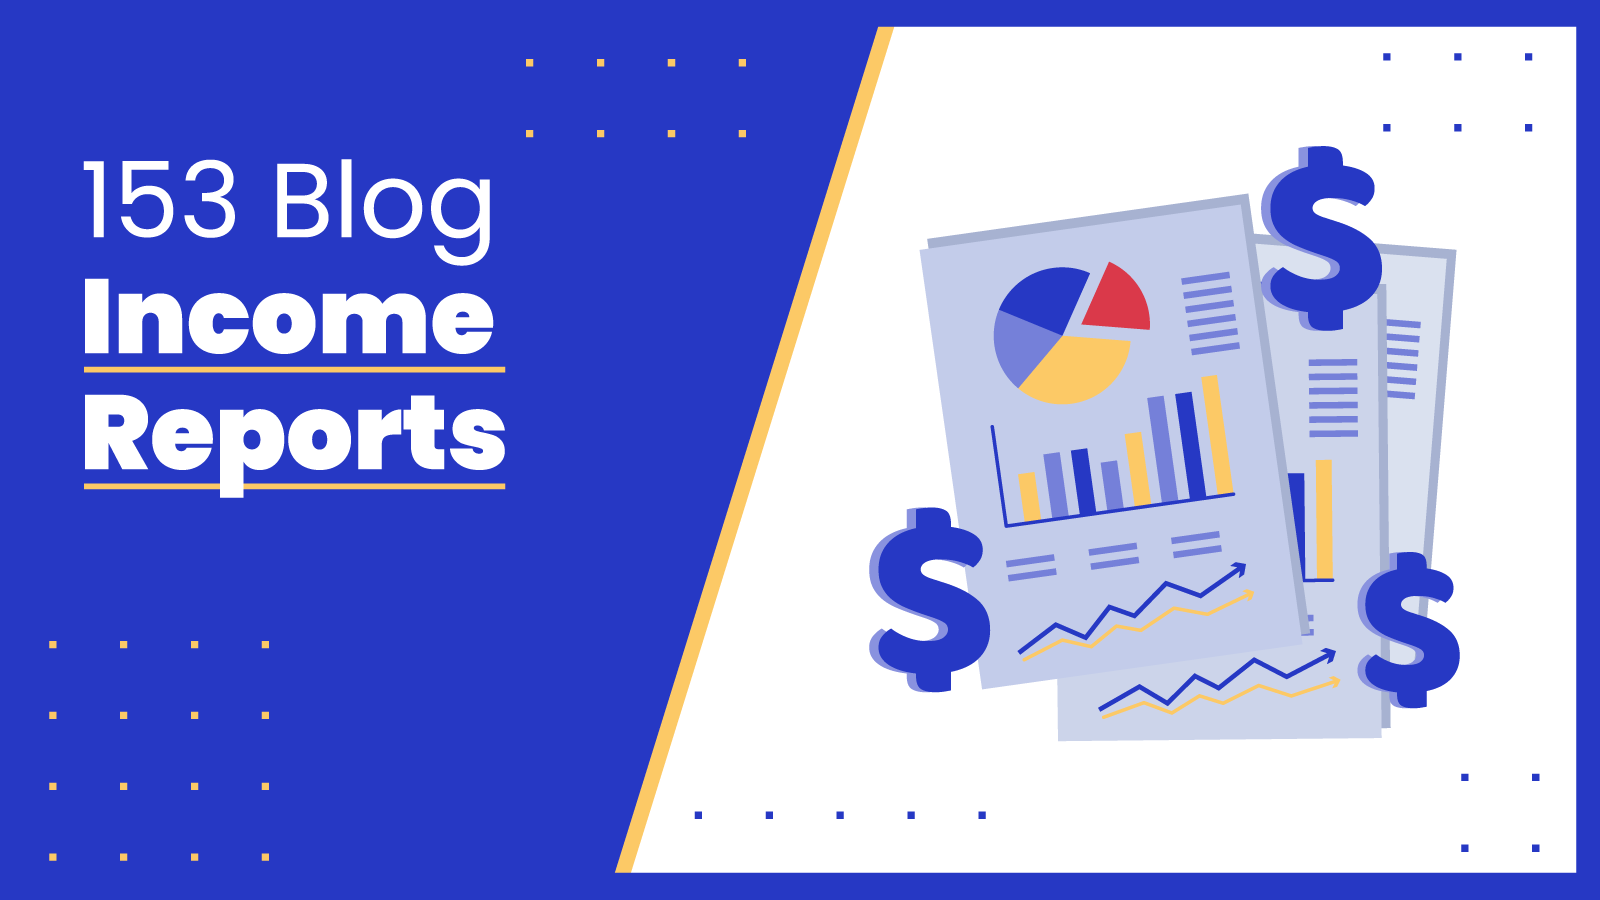 Blog Income Reports featured